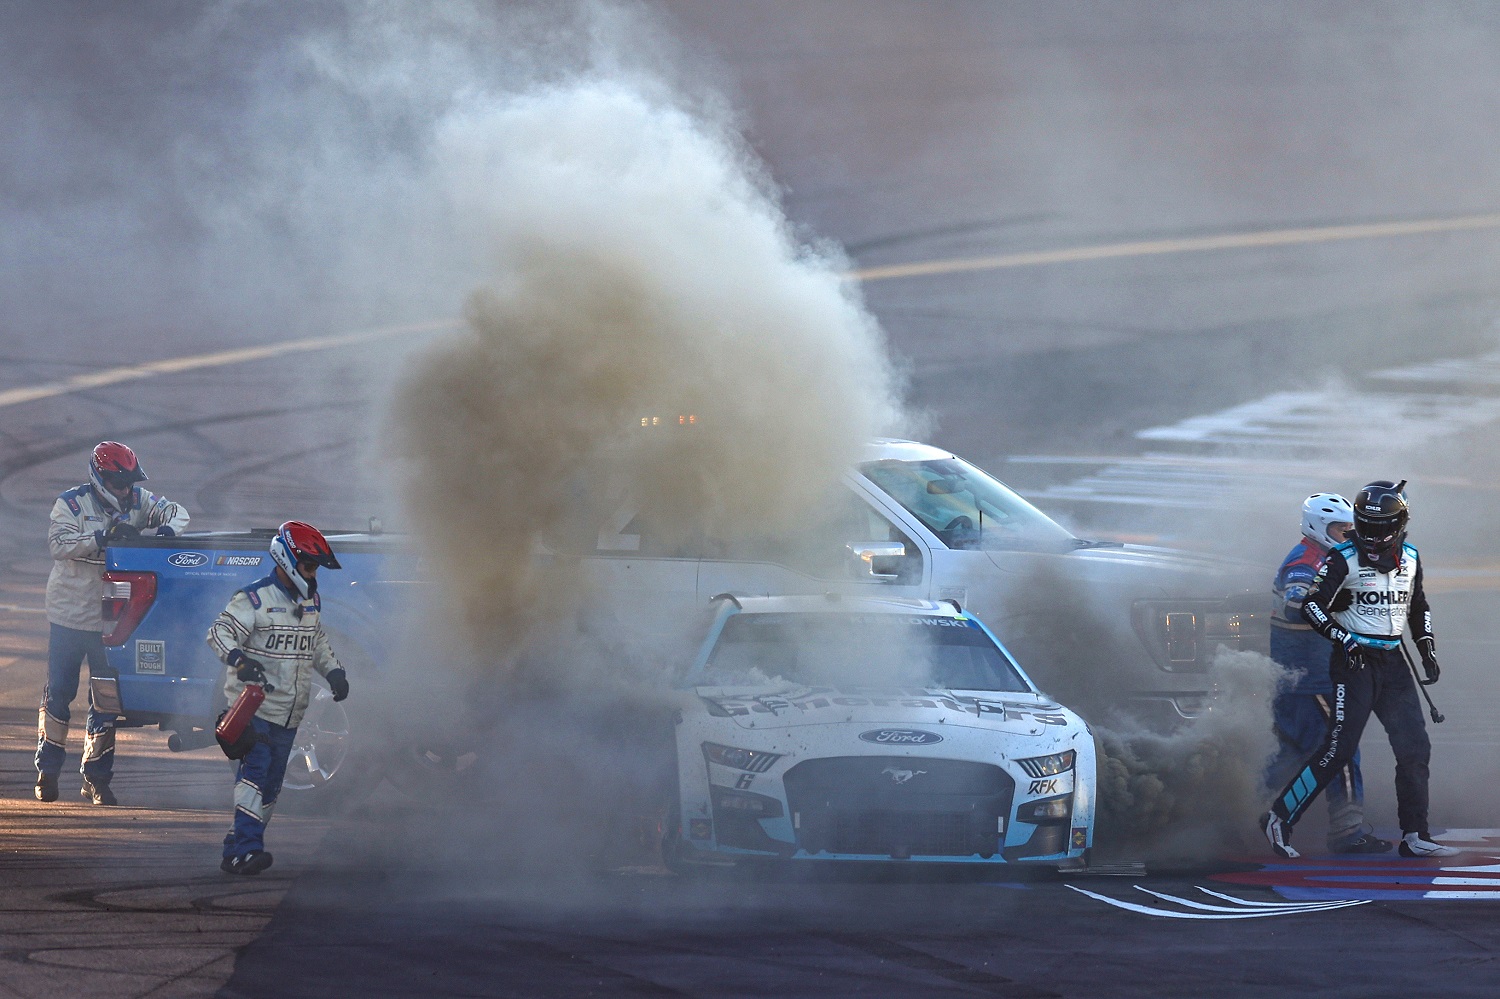 NASCAR safety crews arrive to extinguish flames from the No. 6 Ford as Brad Keselowski walks away after an on-track incident at Phoenix Raceway on Nov. 6, 2022. | Christian Petersen/Getty Images